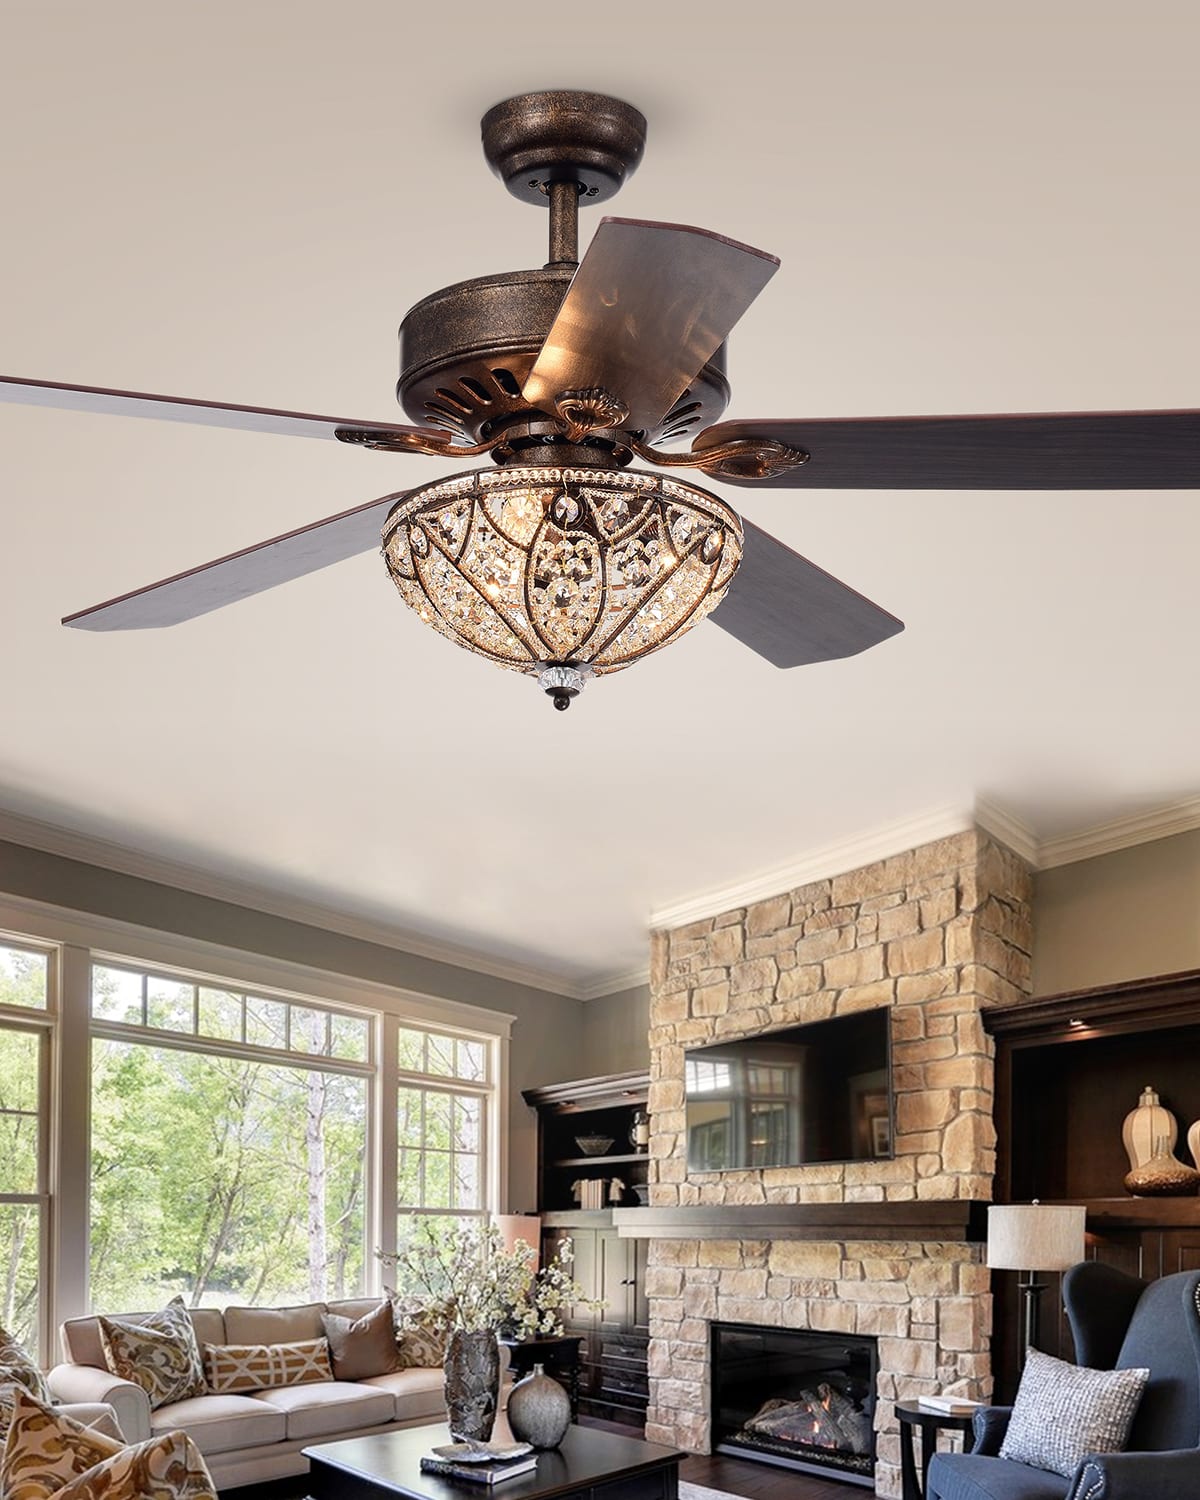 Home Accessories Speckled Bronze Crystal Chandelier Ceiling Fan In Brown